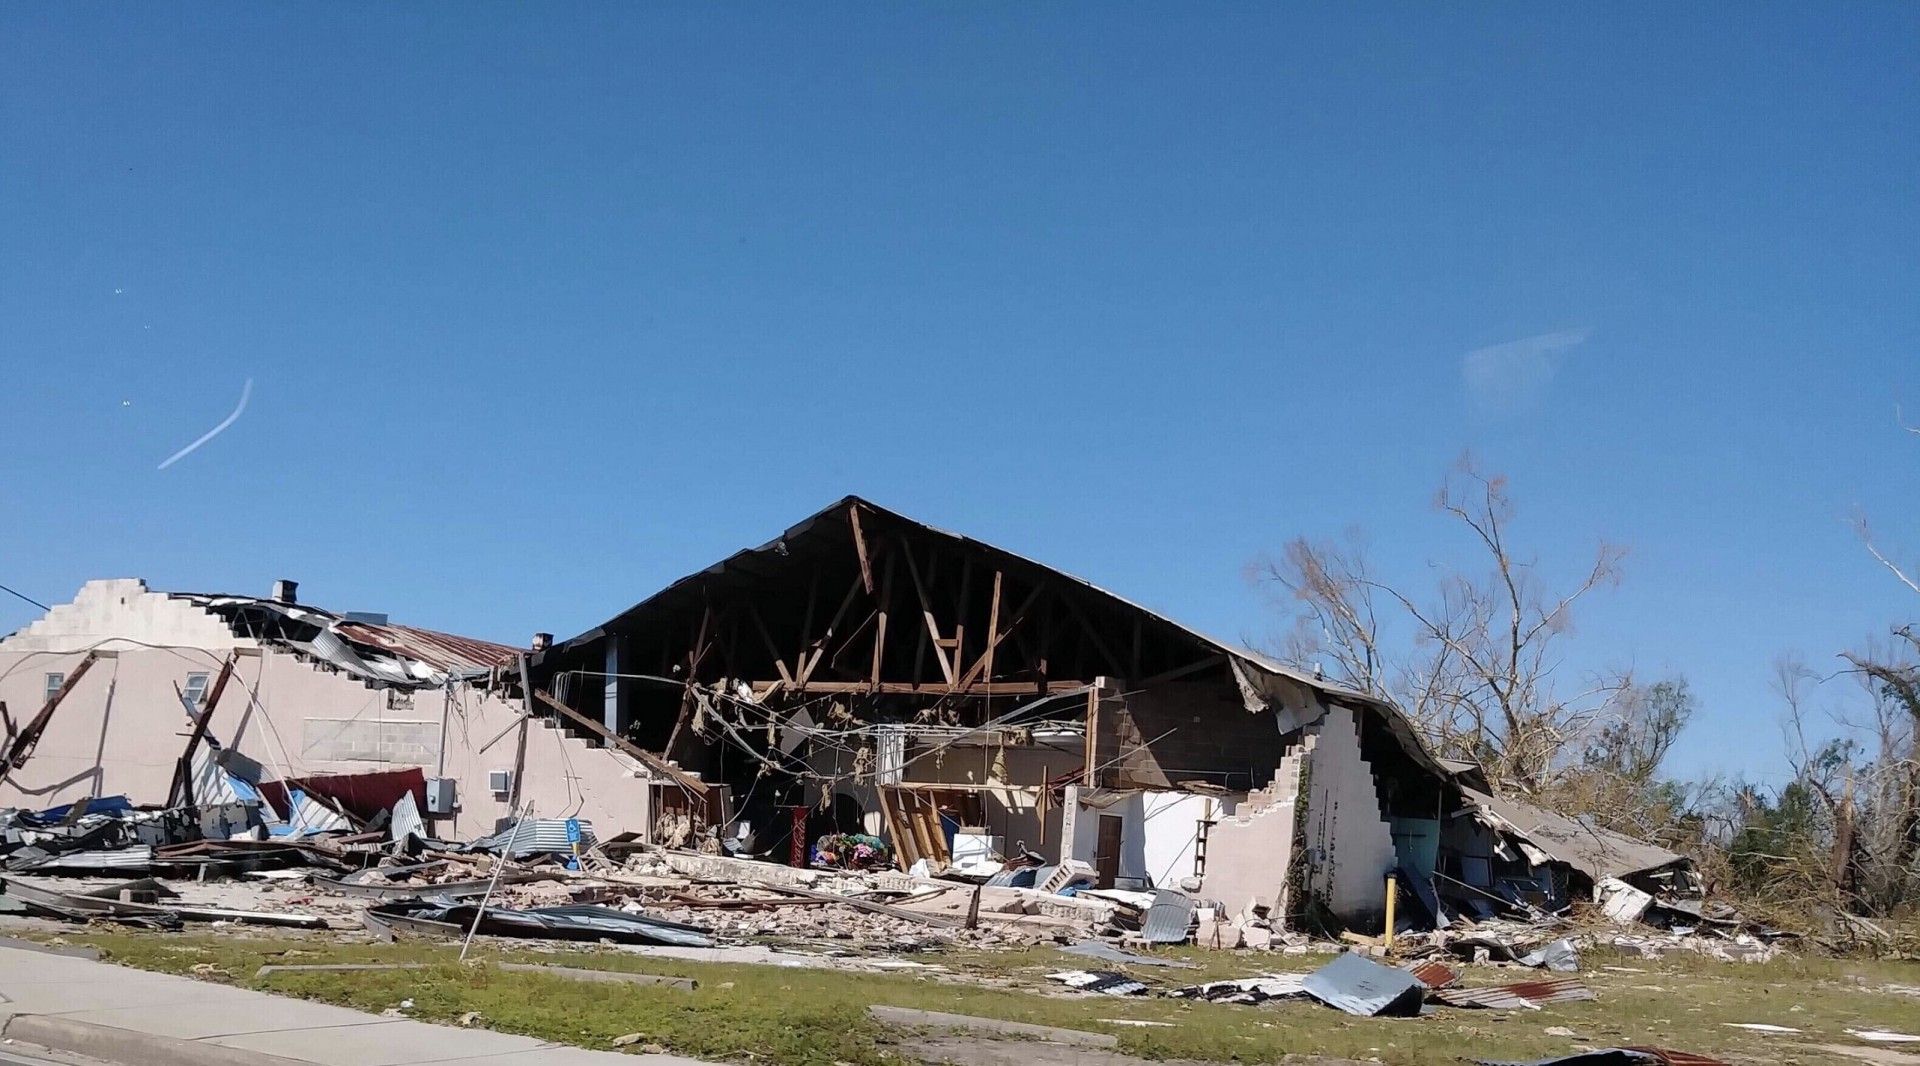 This building in Panama City, Florida was severely damaged in Hurricane Michael.